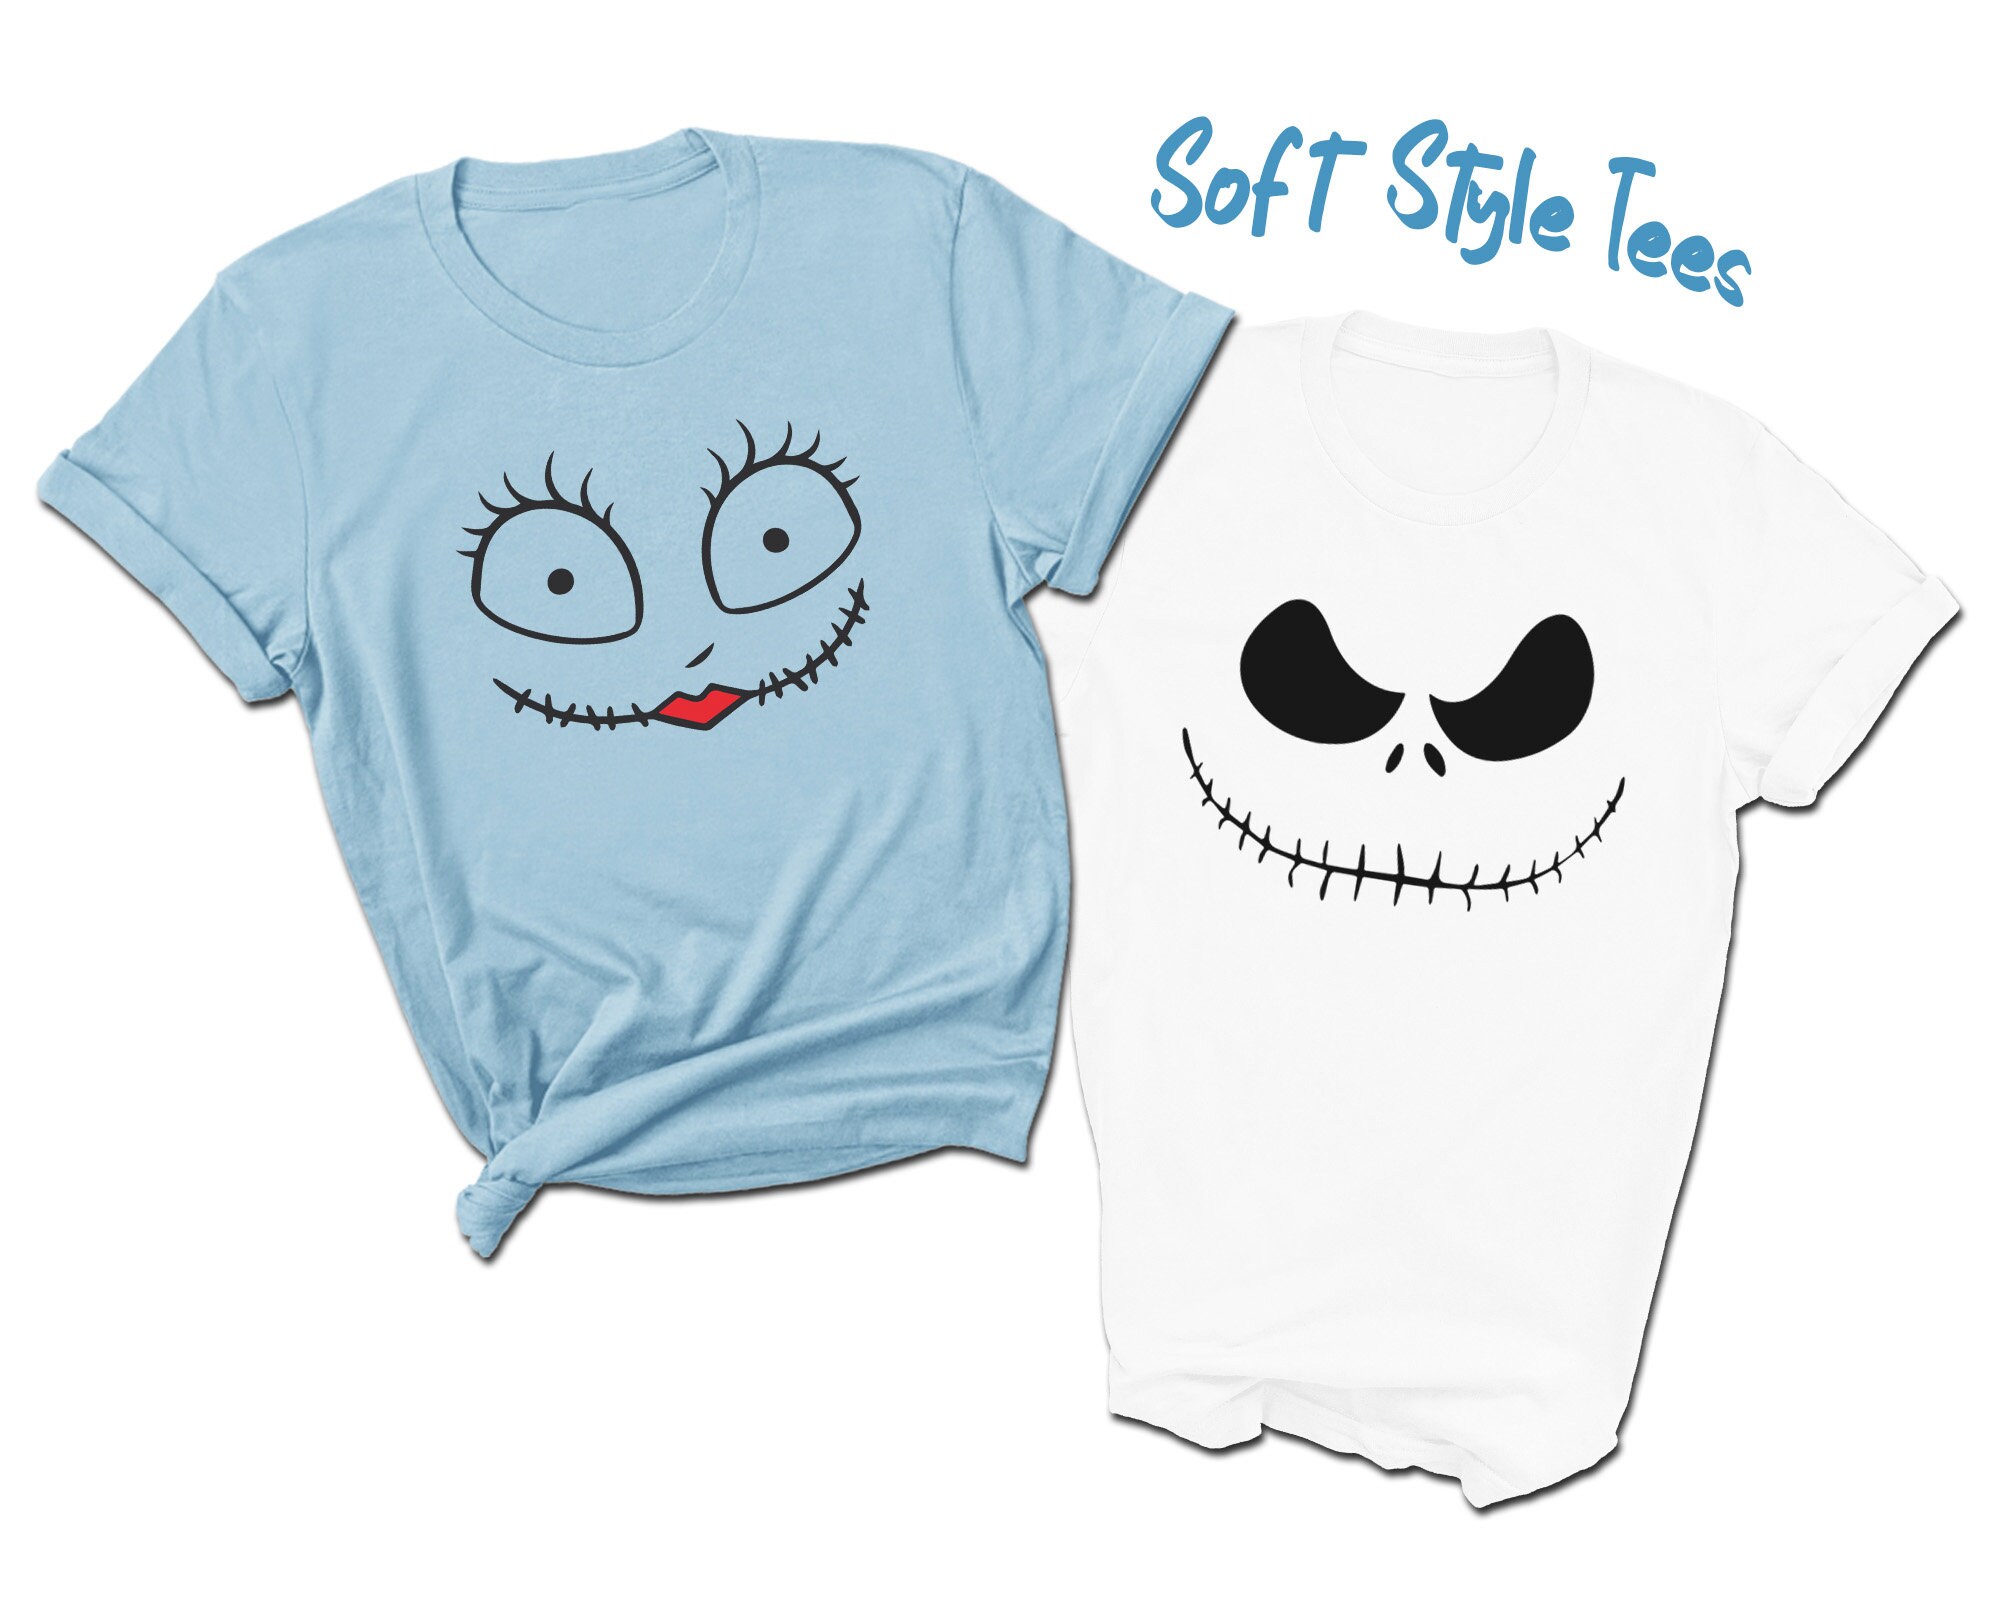 Jack Skellington and Sally Face T-shirts Halloween Costumes Printed on  Premium Soft Style Tees Water Based Ink All Sizes - Etsy